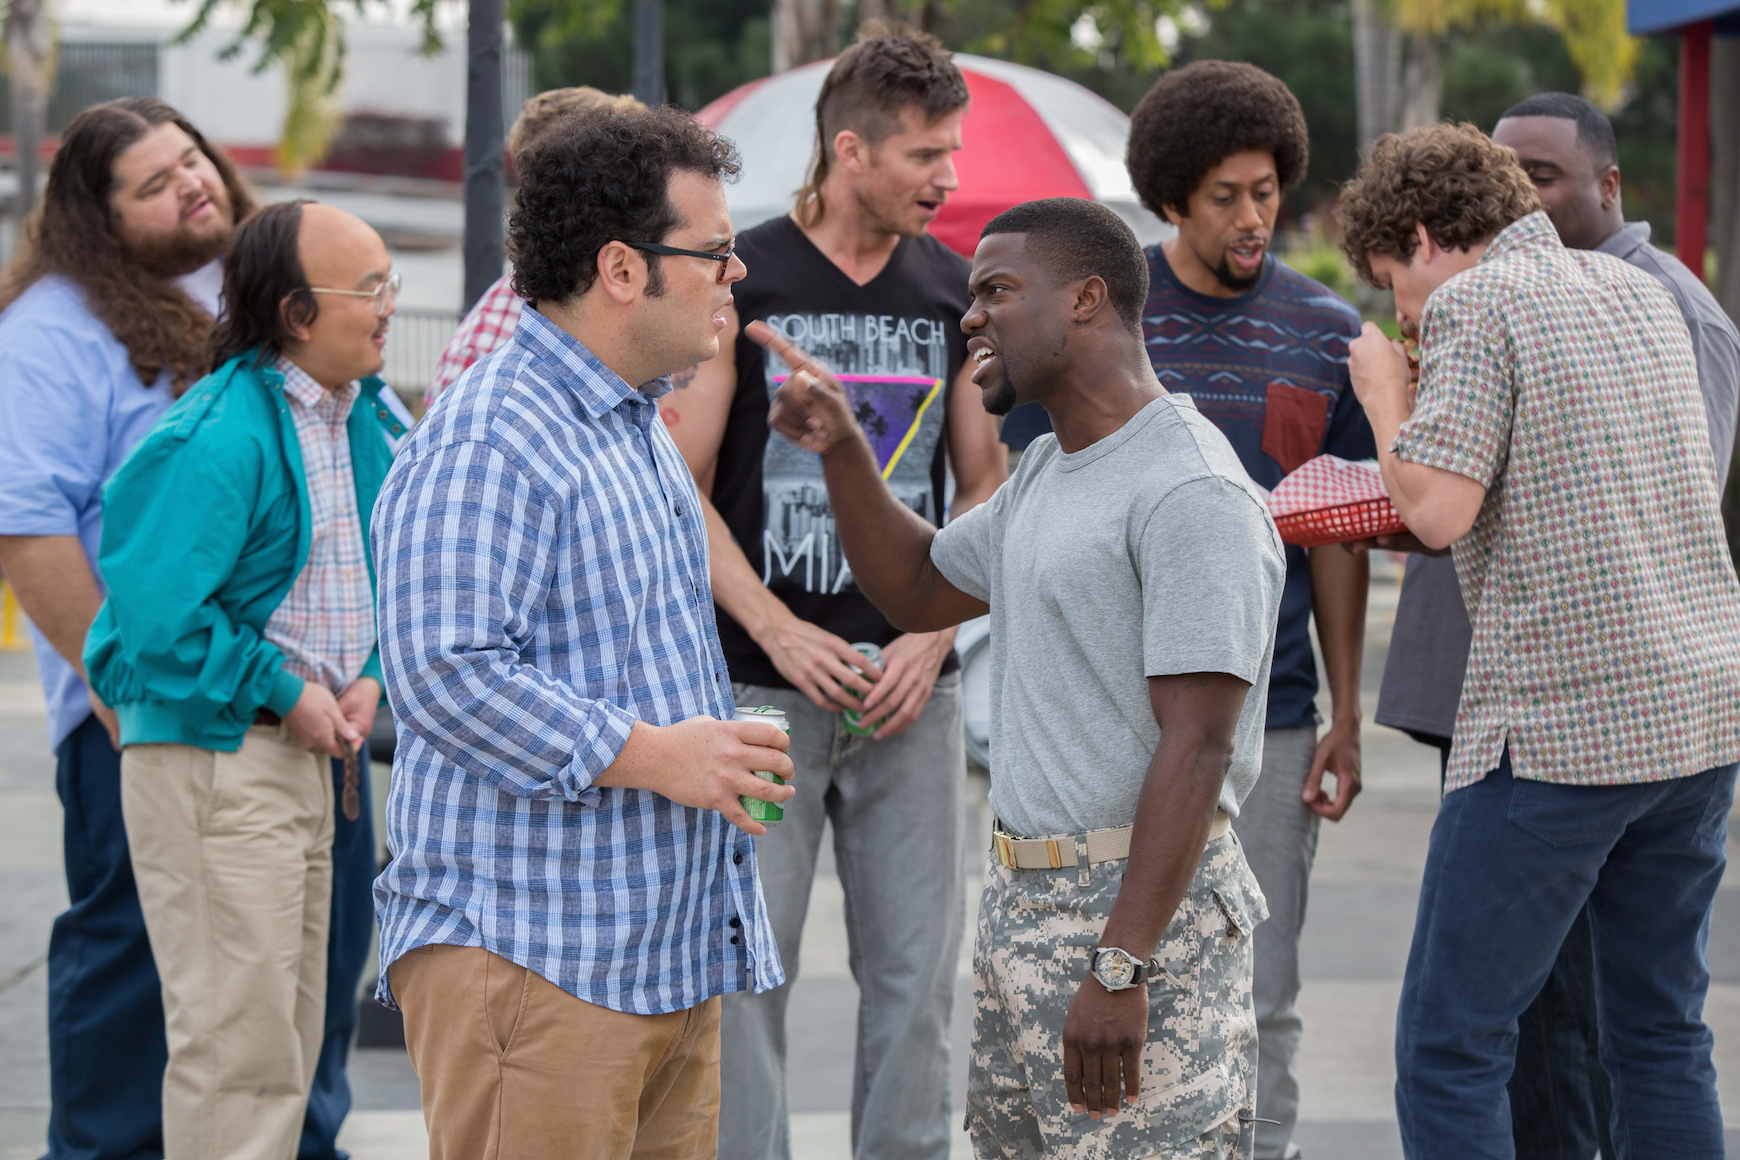 Amazing The Wedding Ringer Pictures & Backgrounds